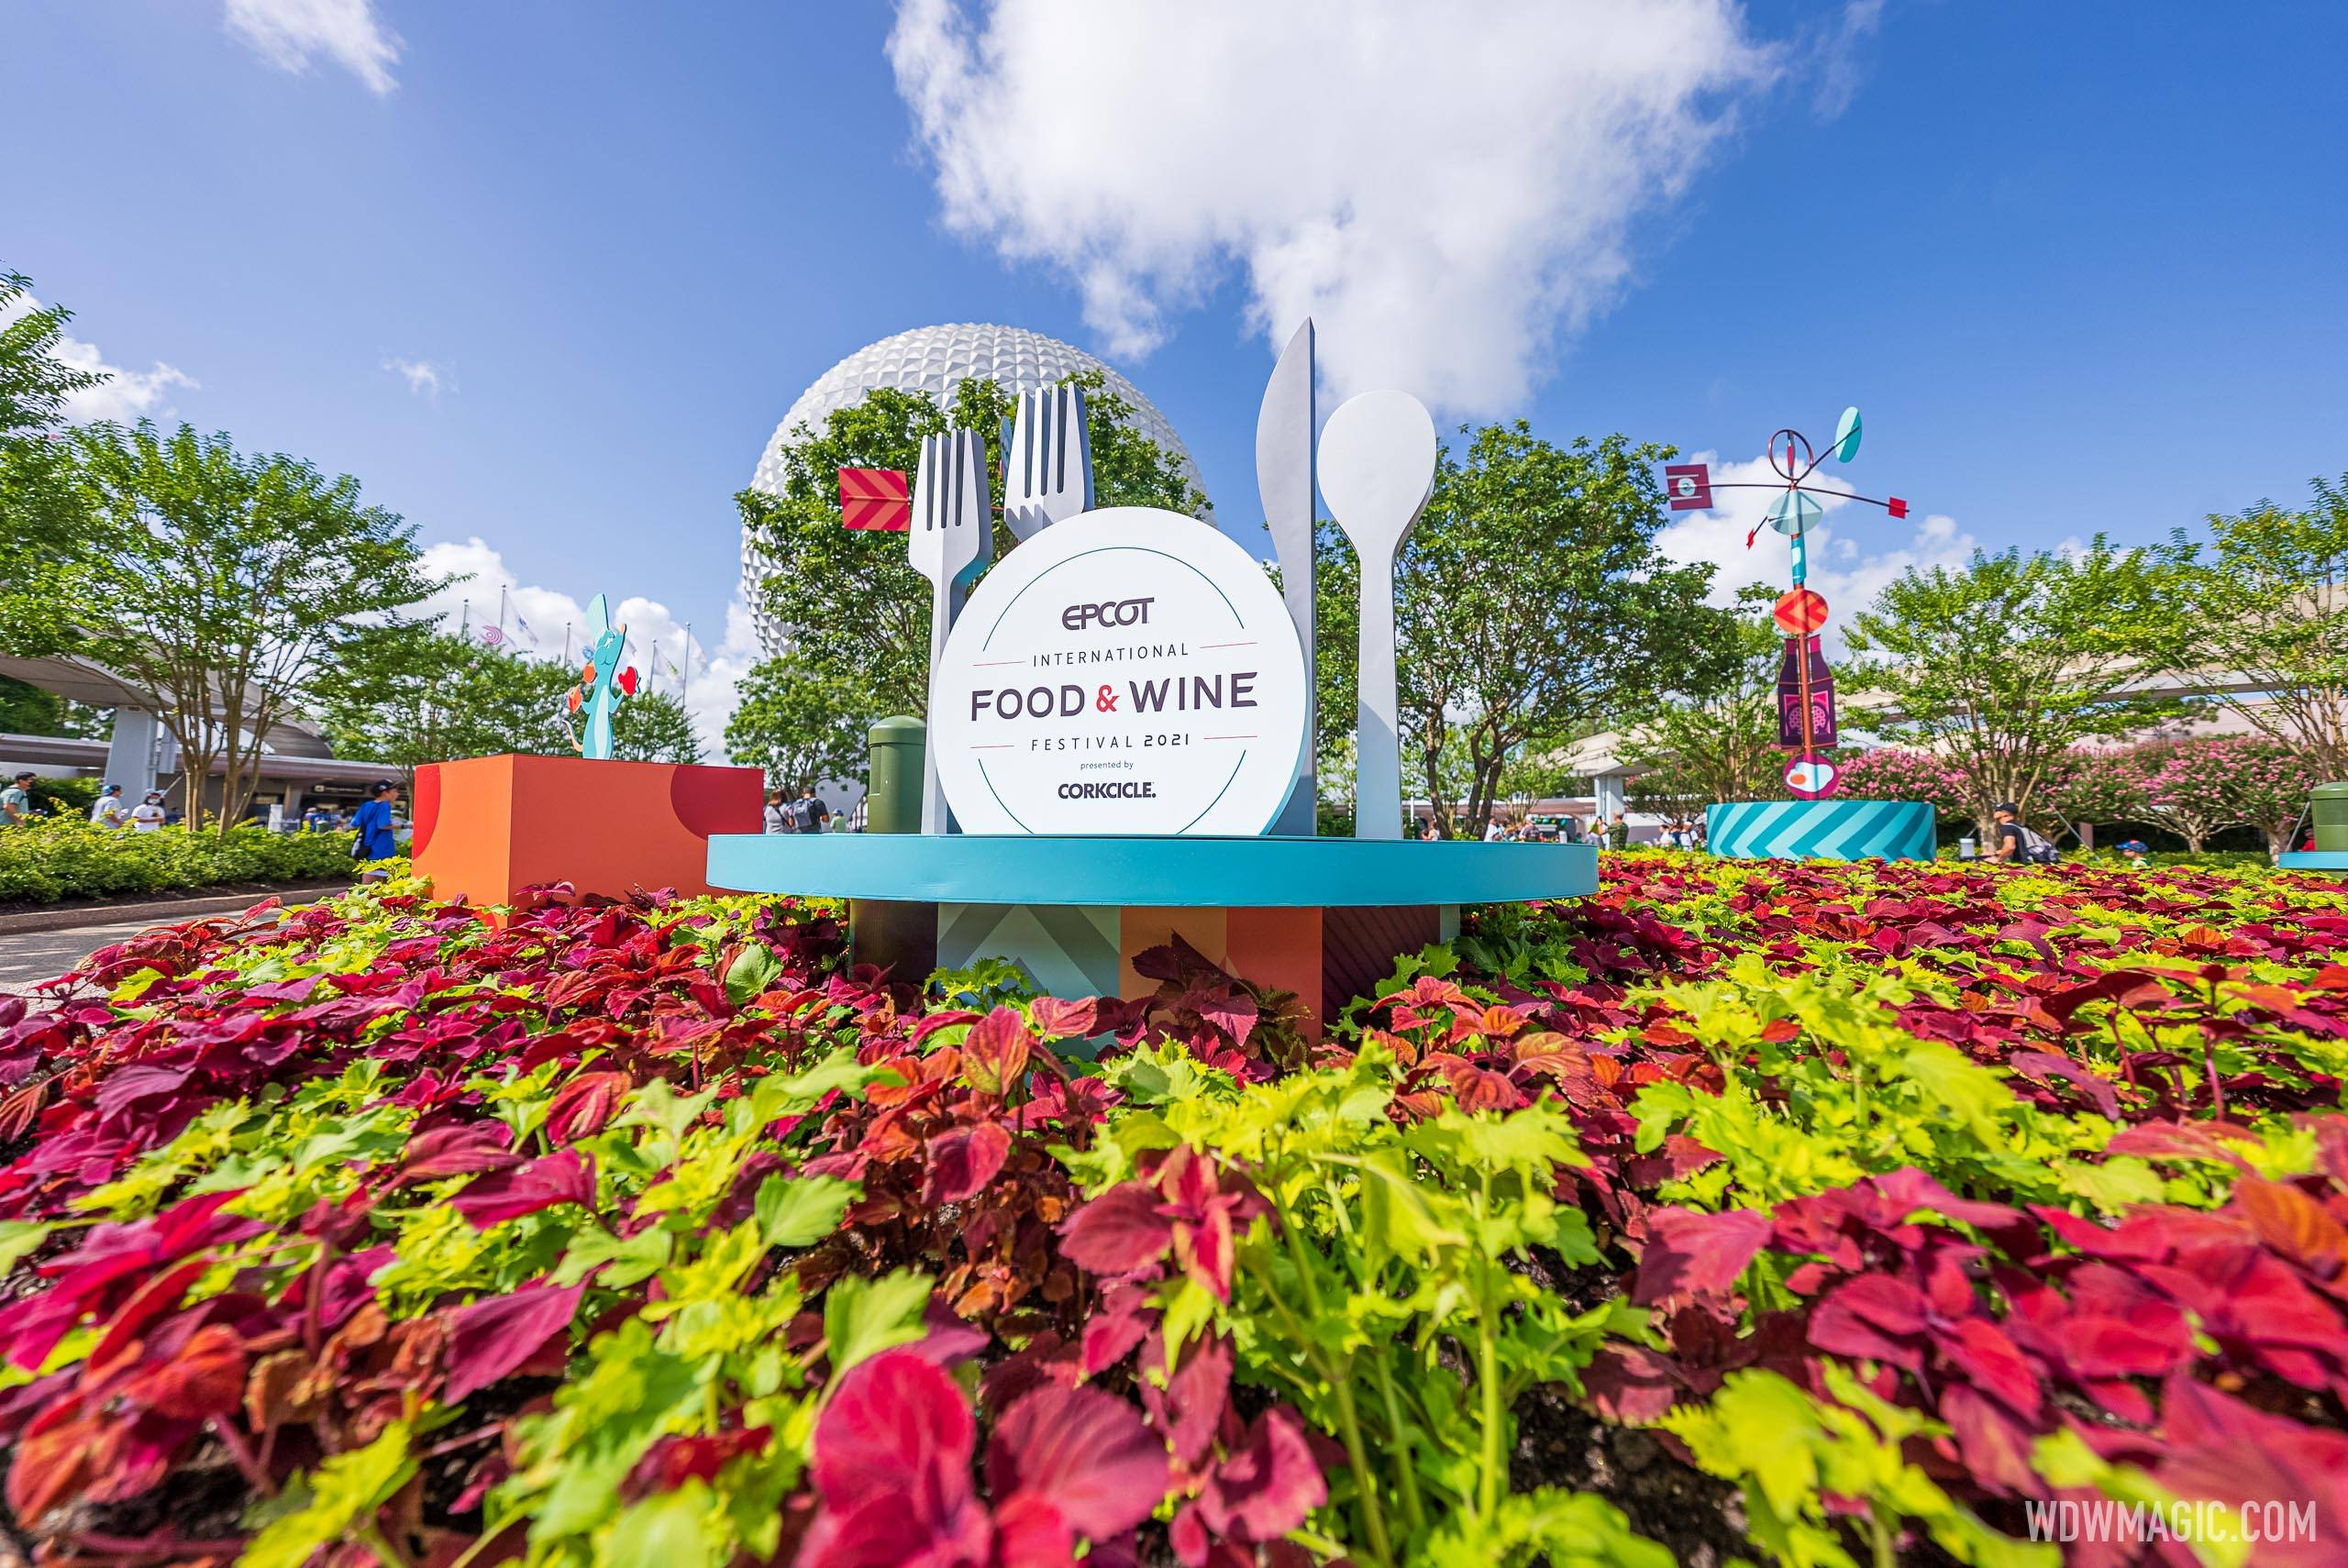 Dates announced for the 2022 EPCOT International Food and Wine Festival